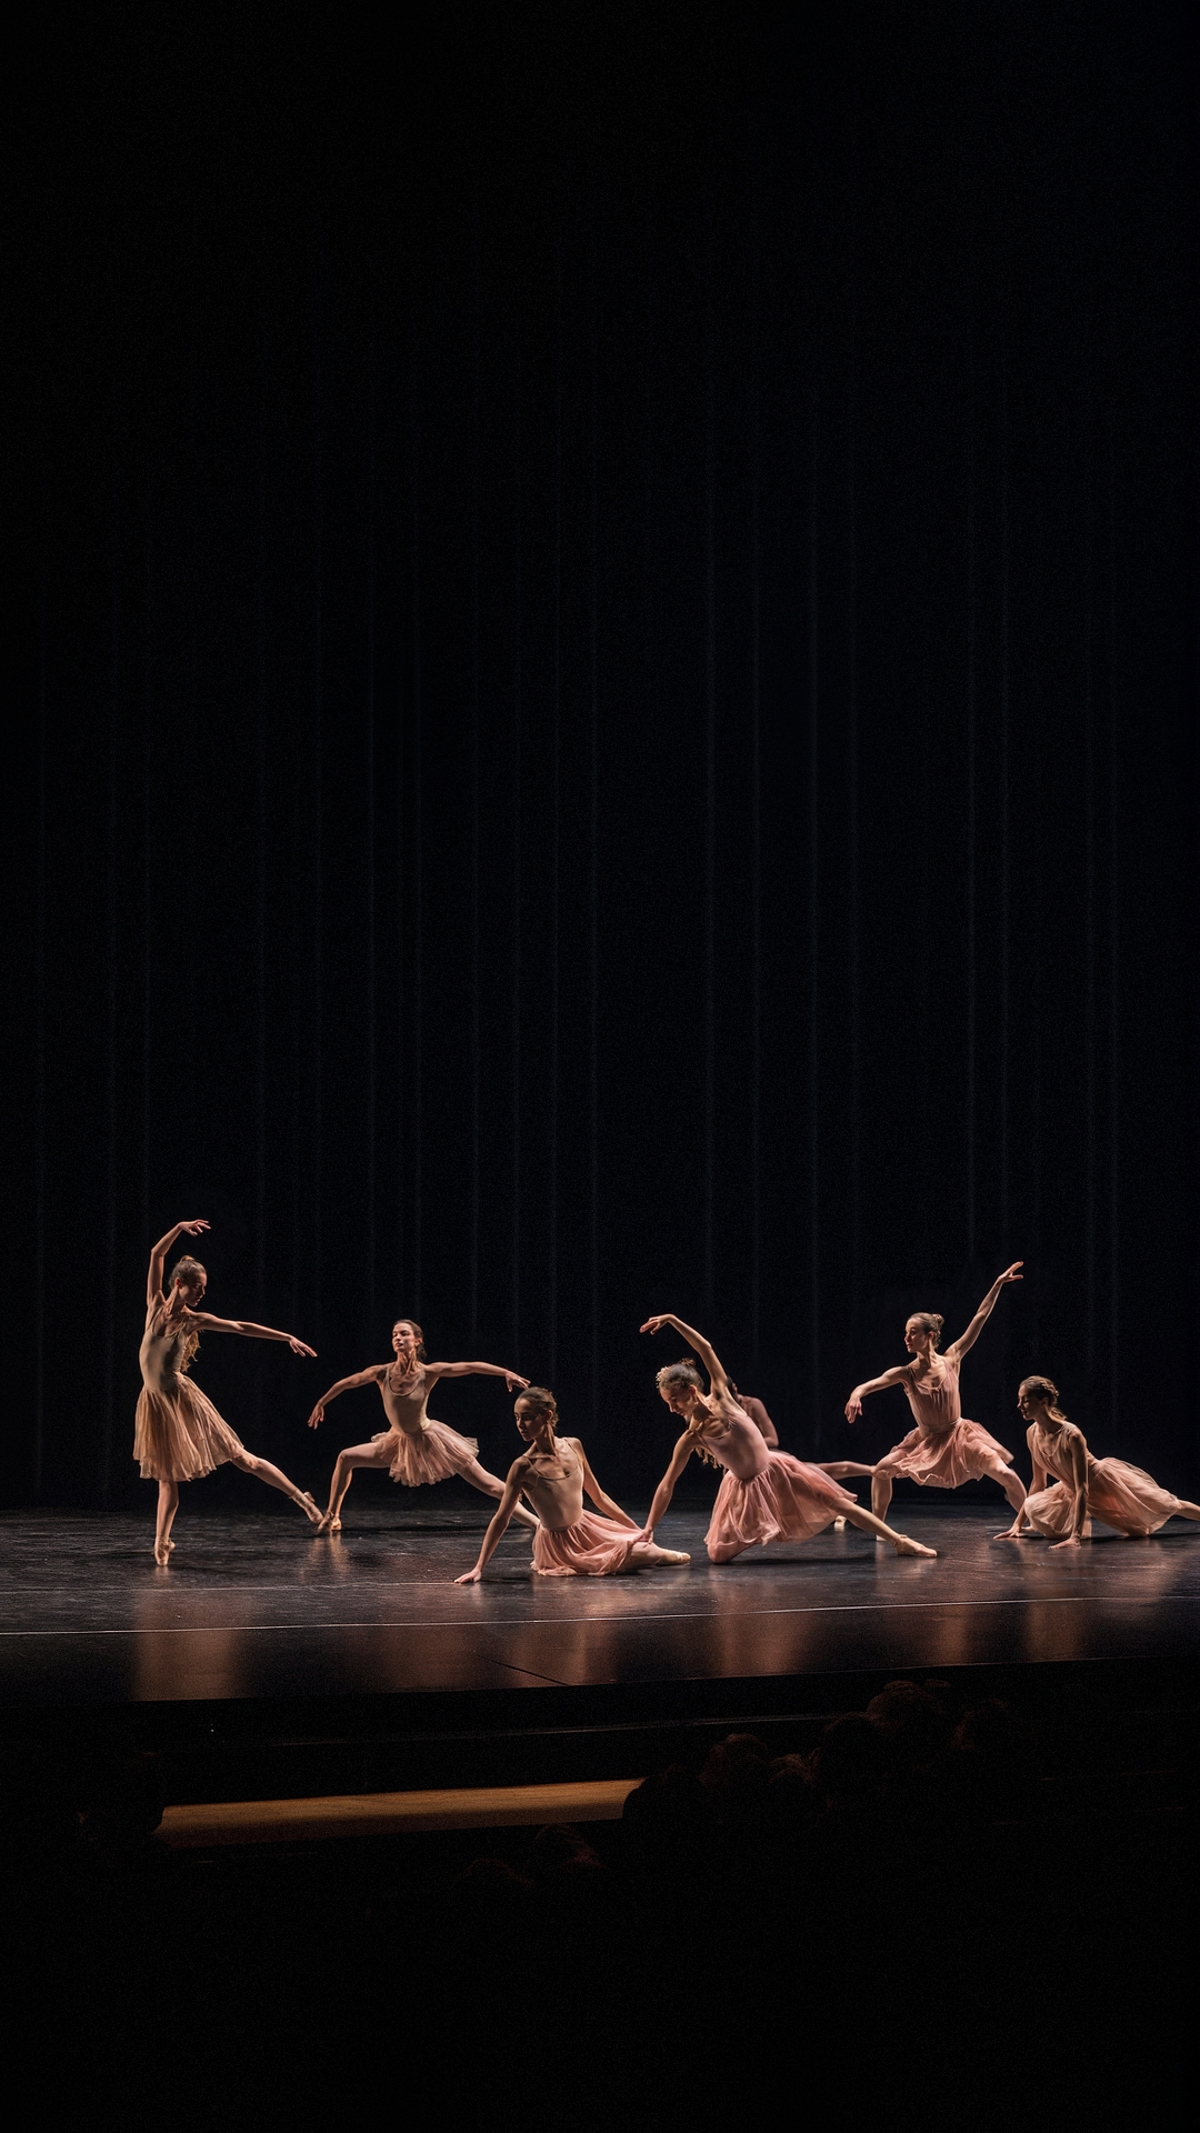 A group of dancers performing on stage in a darkened auditorium.